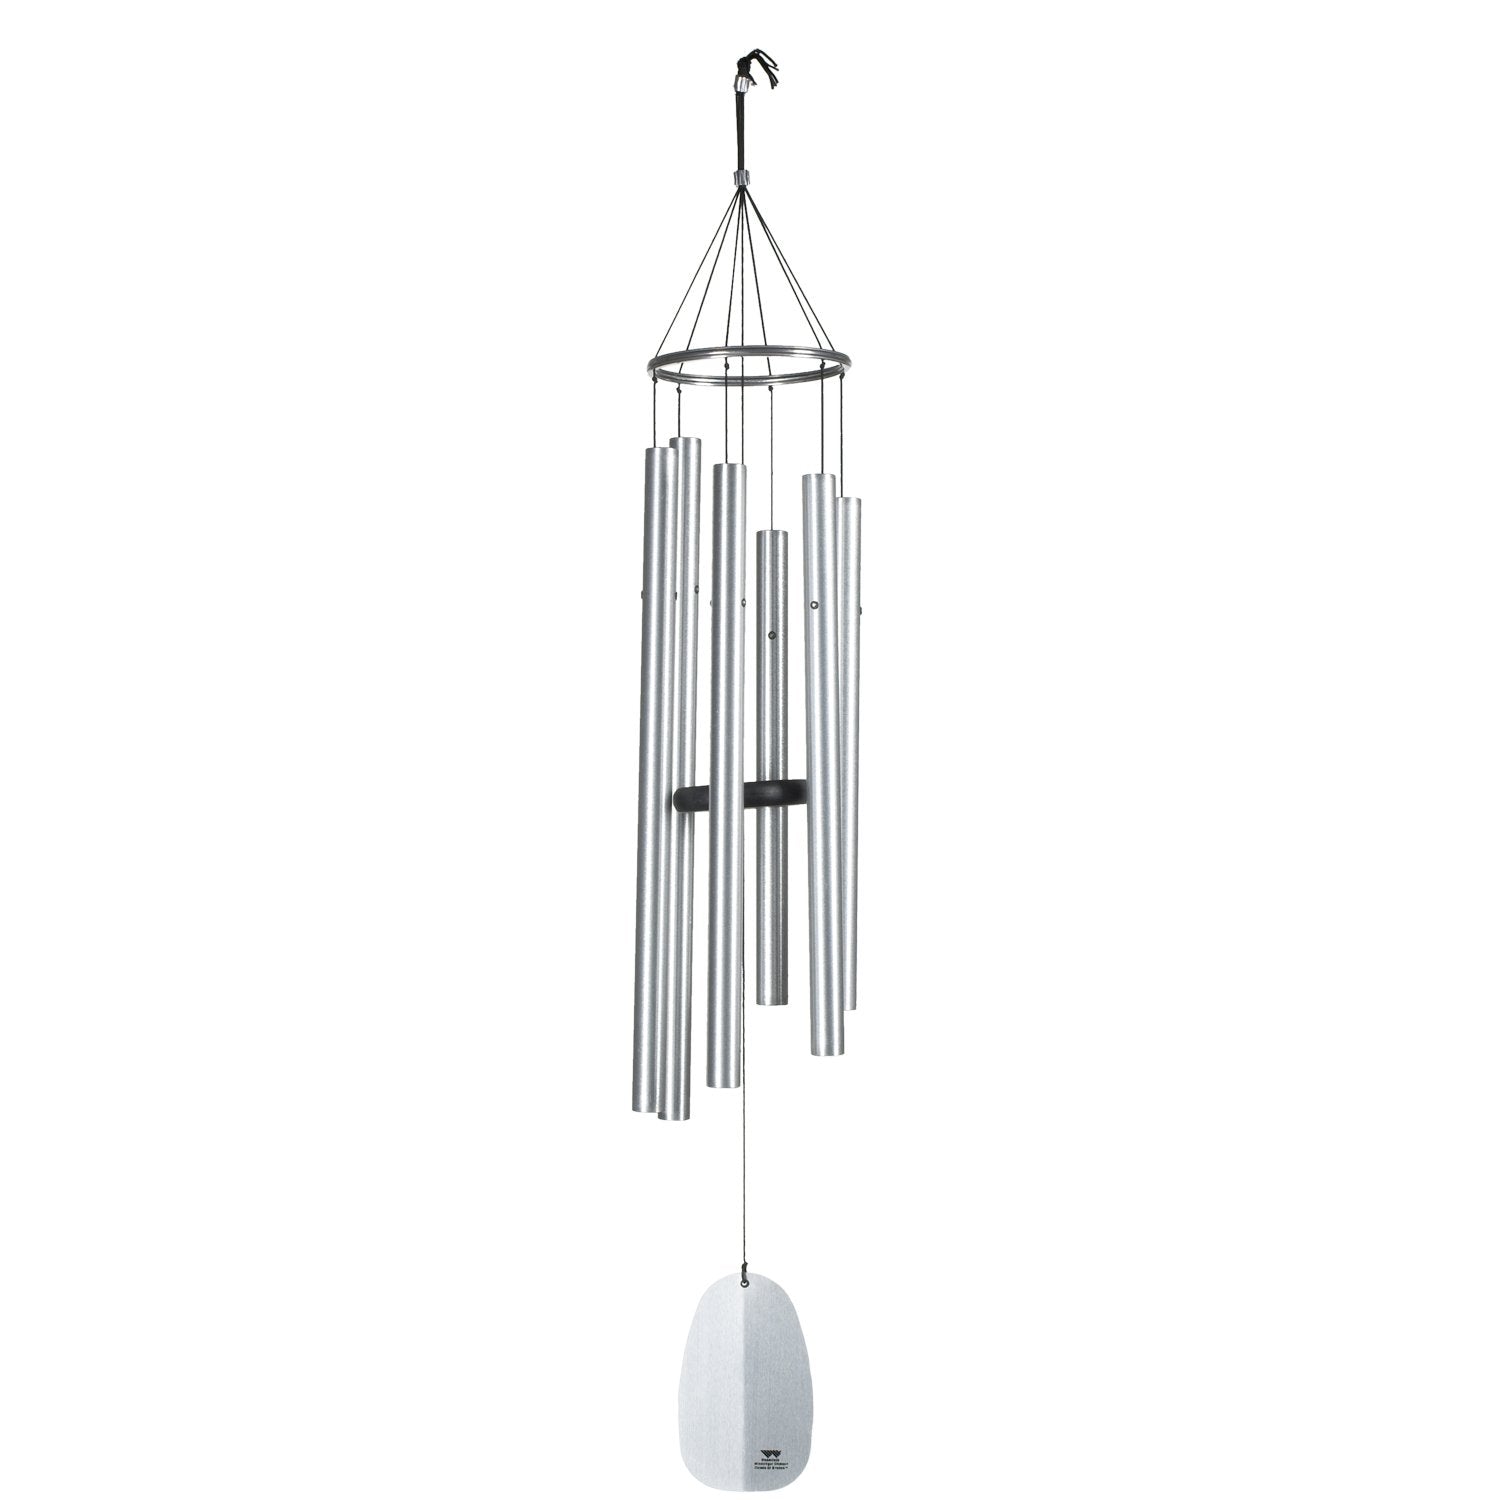 Windsinger Chimes of Athena - Silver full product image